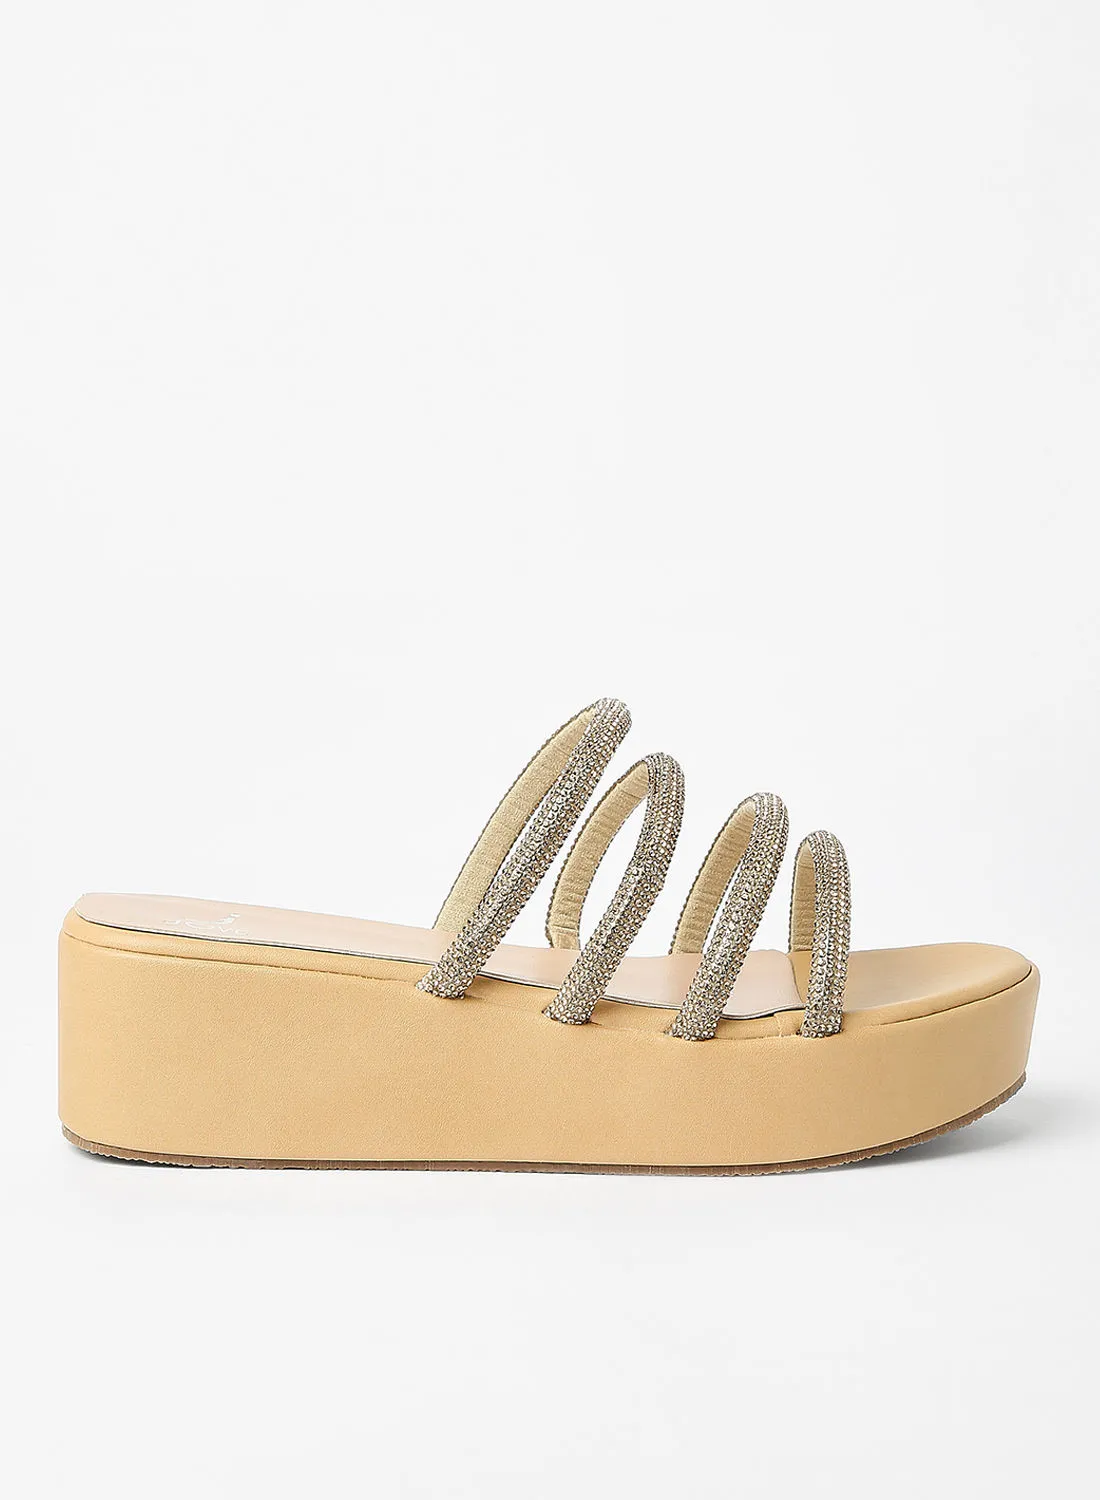 Jove Fashionable Wedge Sandals Gold